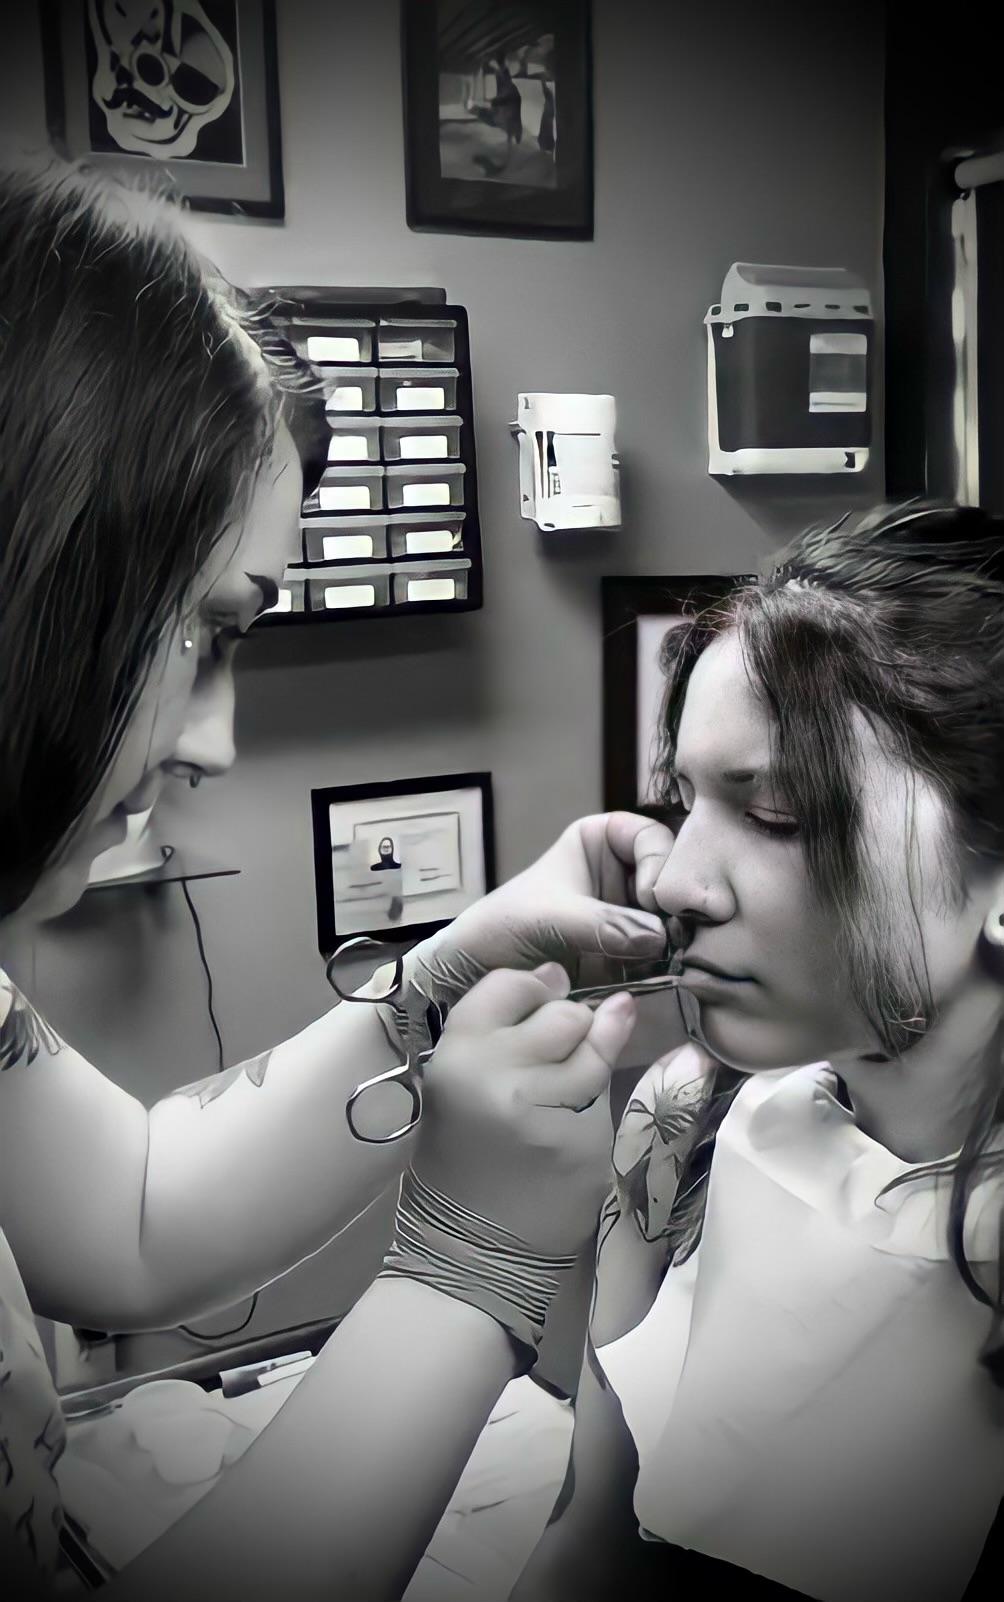 Tattoo artist holding a pair of forceps near a woman’s face